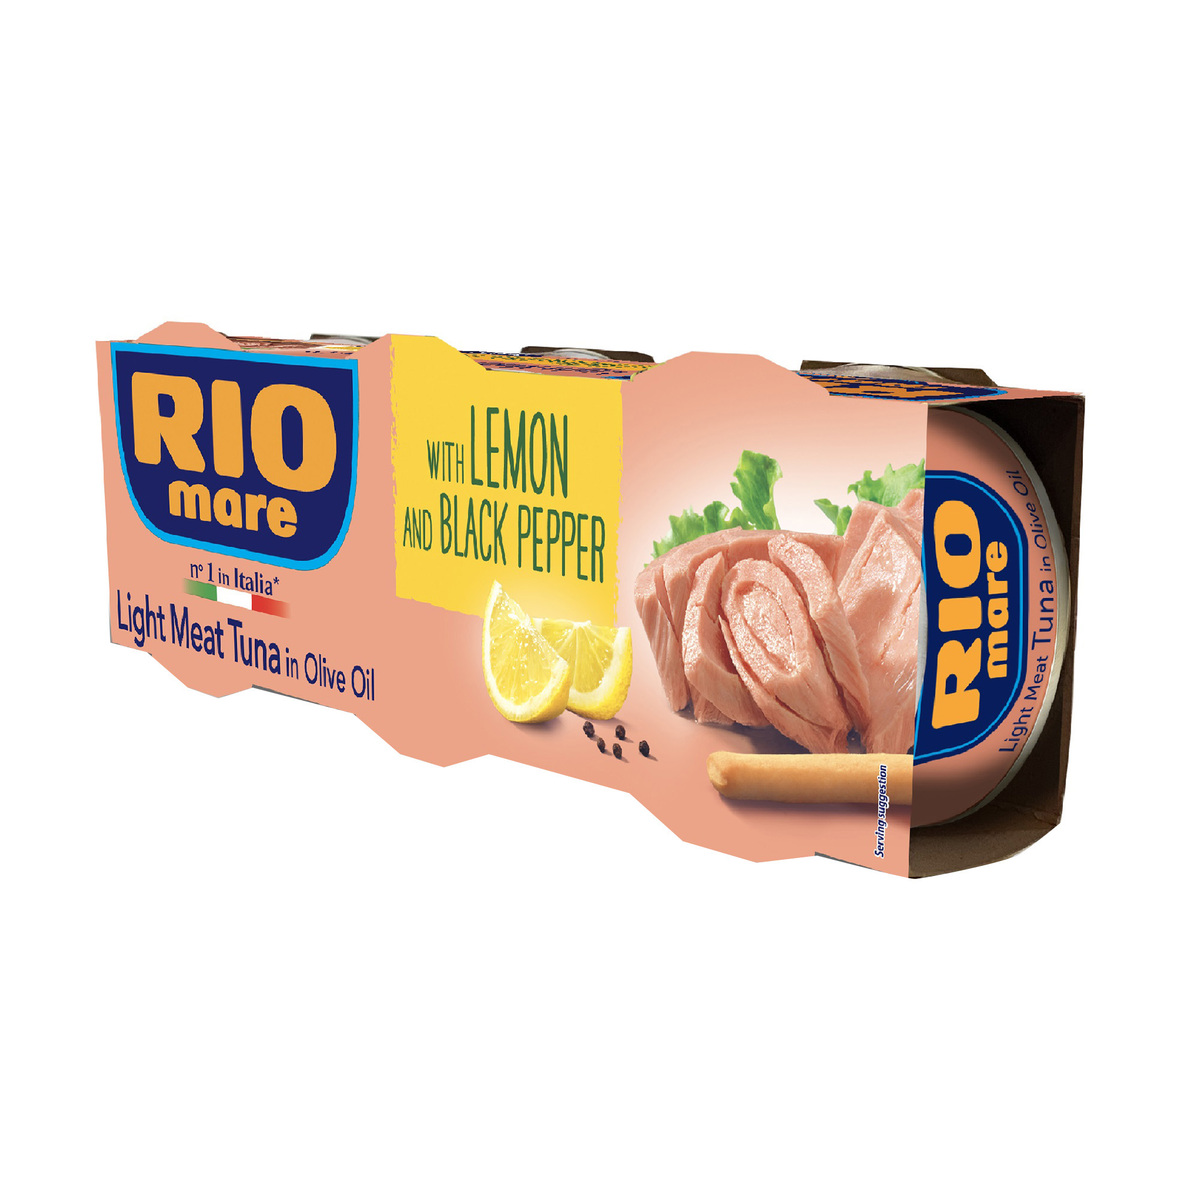 Rio Mare Light Meat Tuna In Olive Oil With Lemon And Black Pepper 3 x 80 g